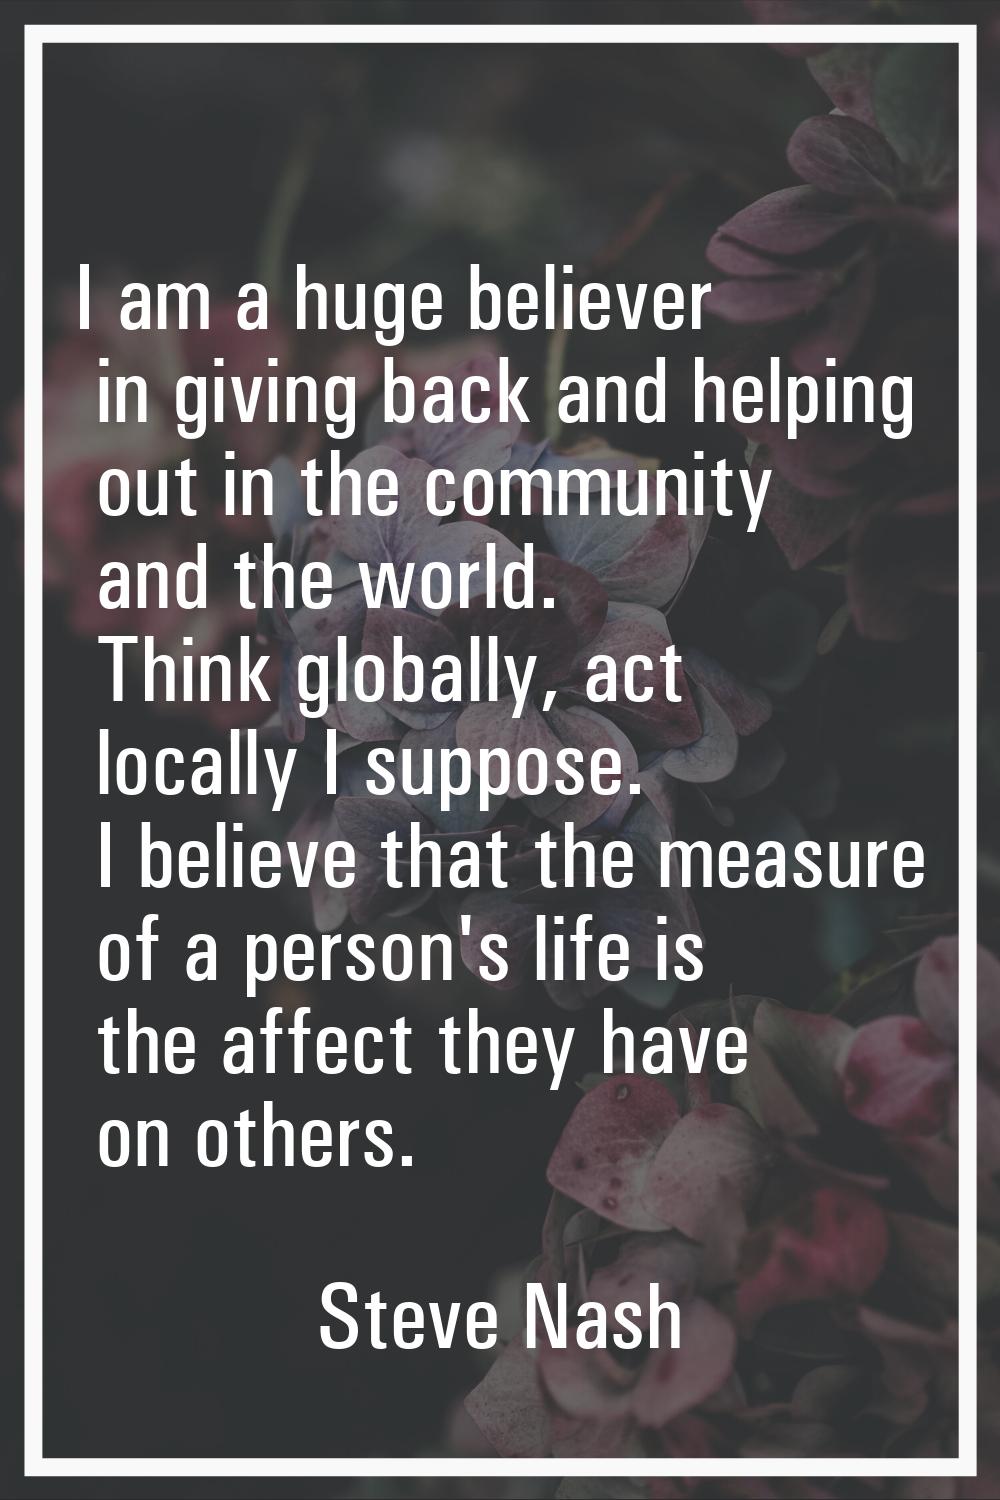 I am a huge believer in giving back and helping out in the community and the world. Think globally,